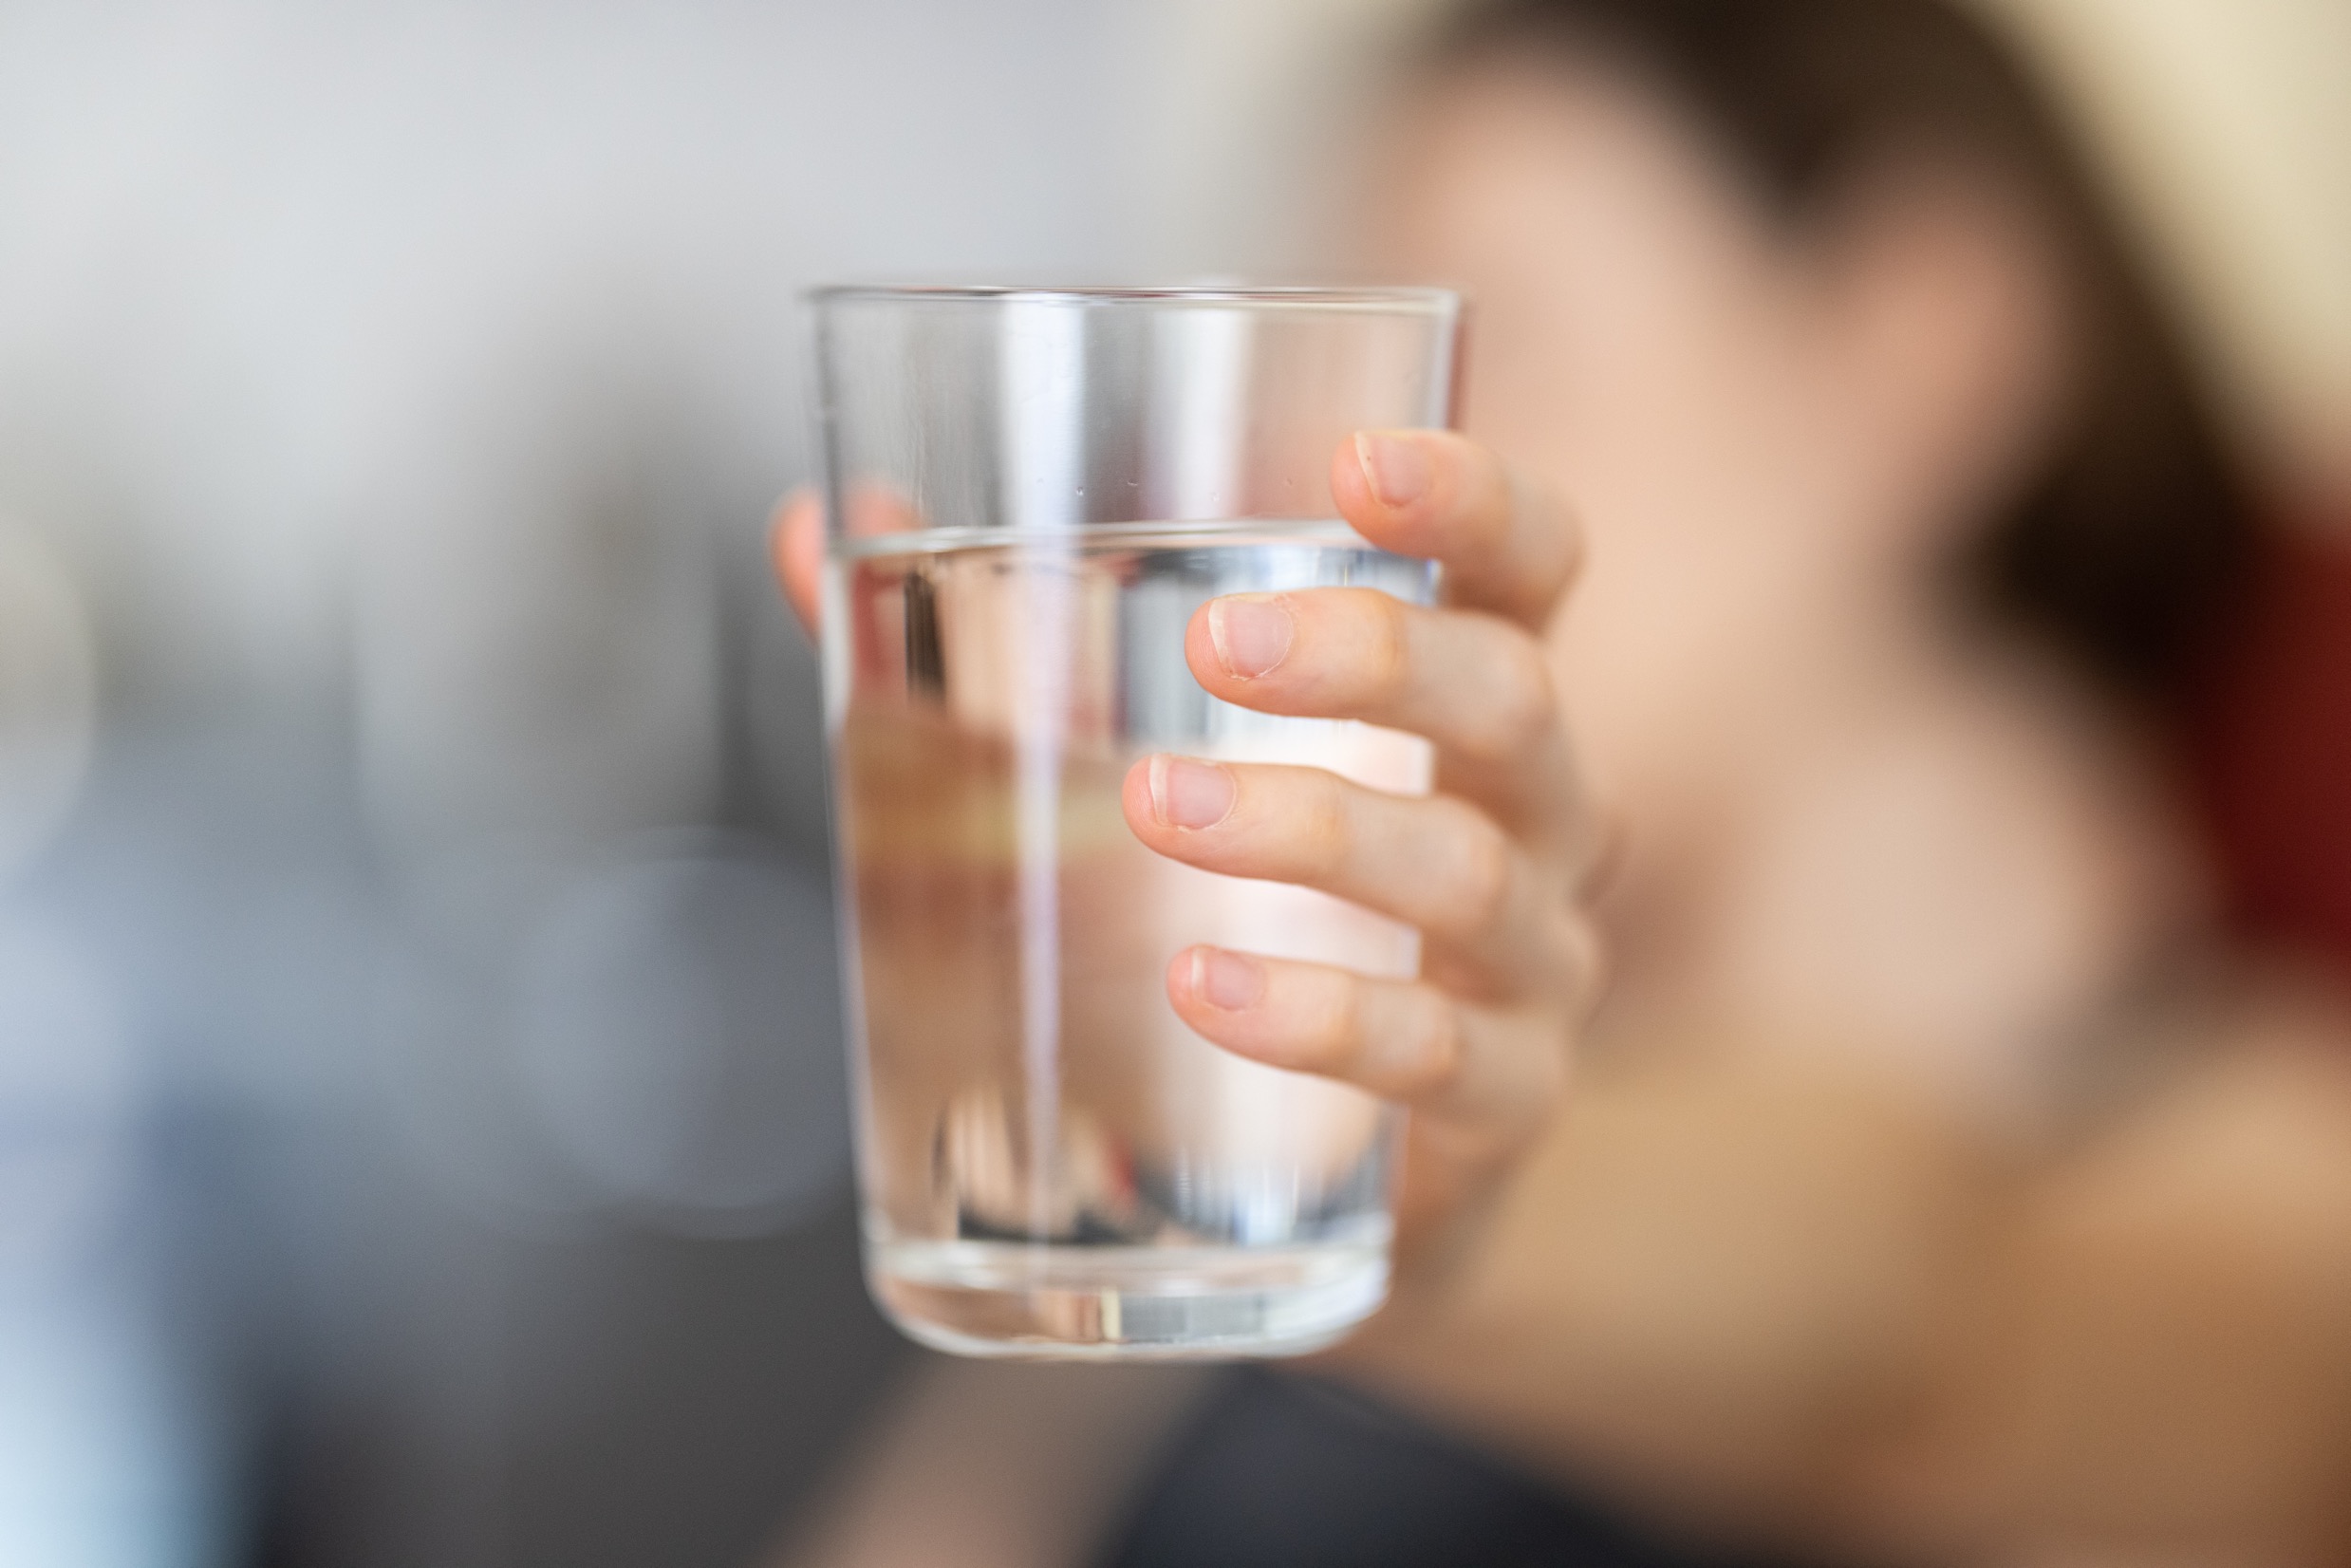 A glass of water. Photo by Engin Akyurt on Unsplash.com